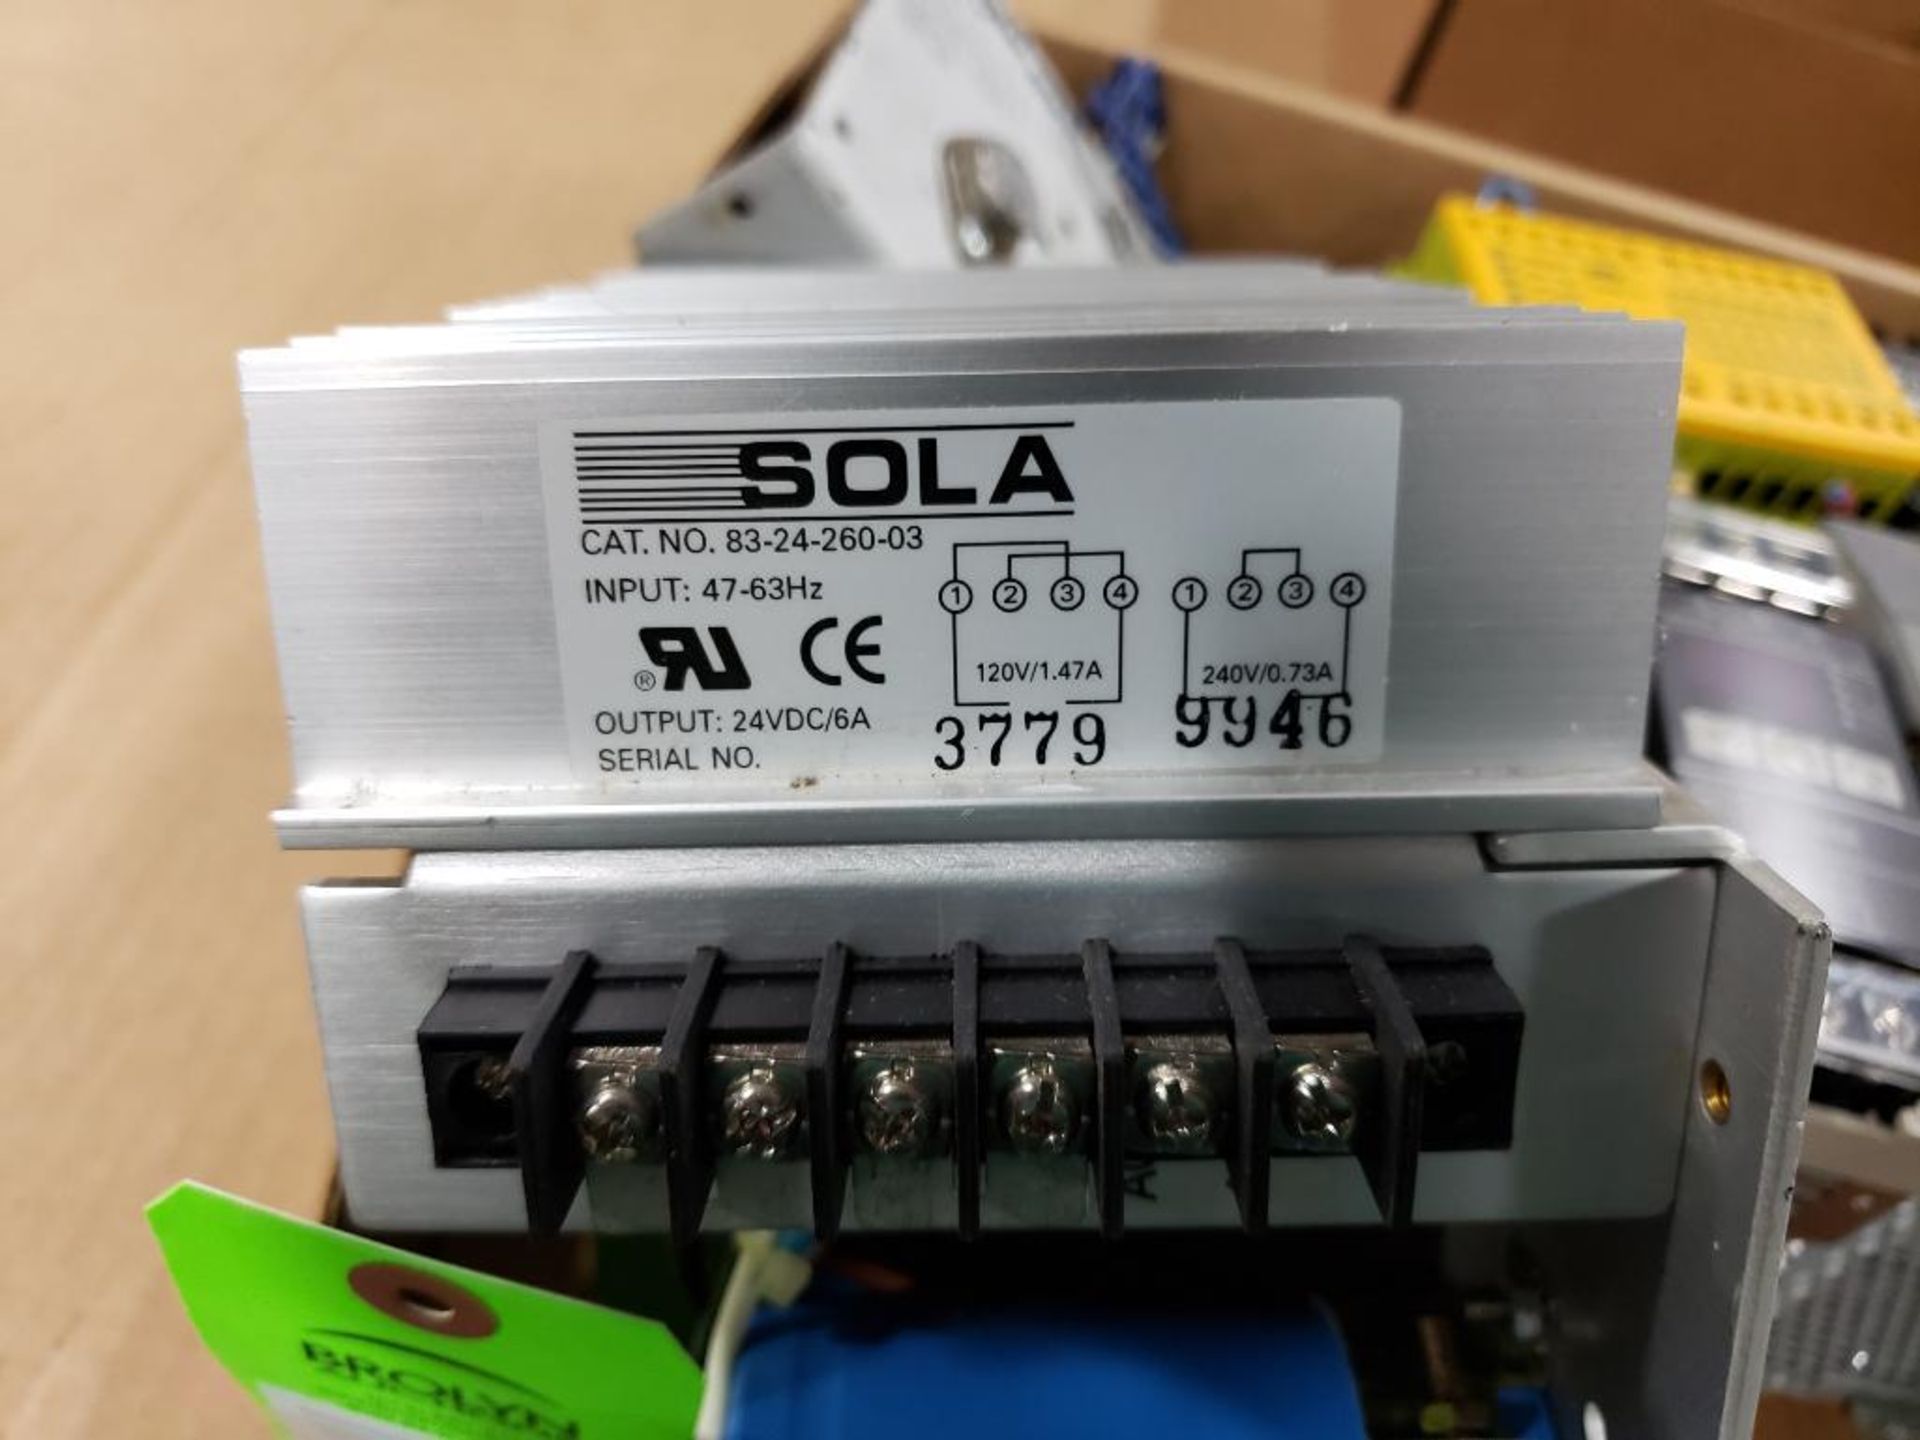 Qty 6 - Assorted electrical power supply, relay. Omron, Sola, Cutler Hammer, Pilz. - Image 6 of 10